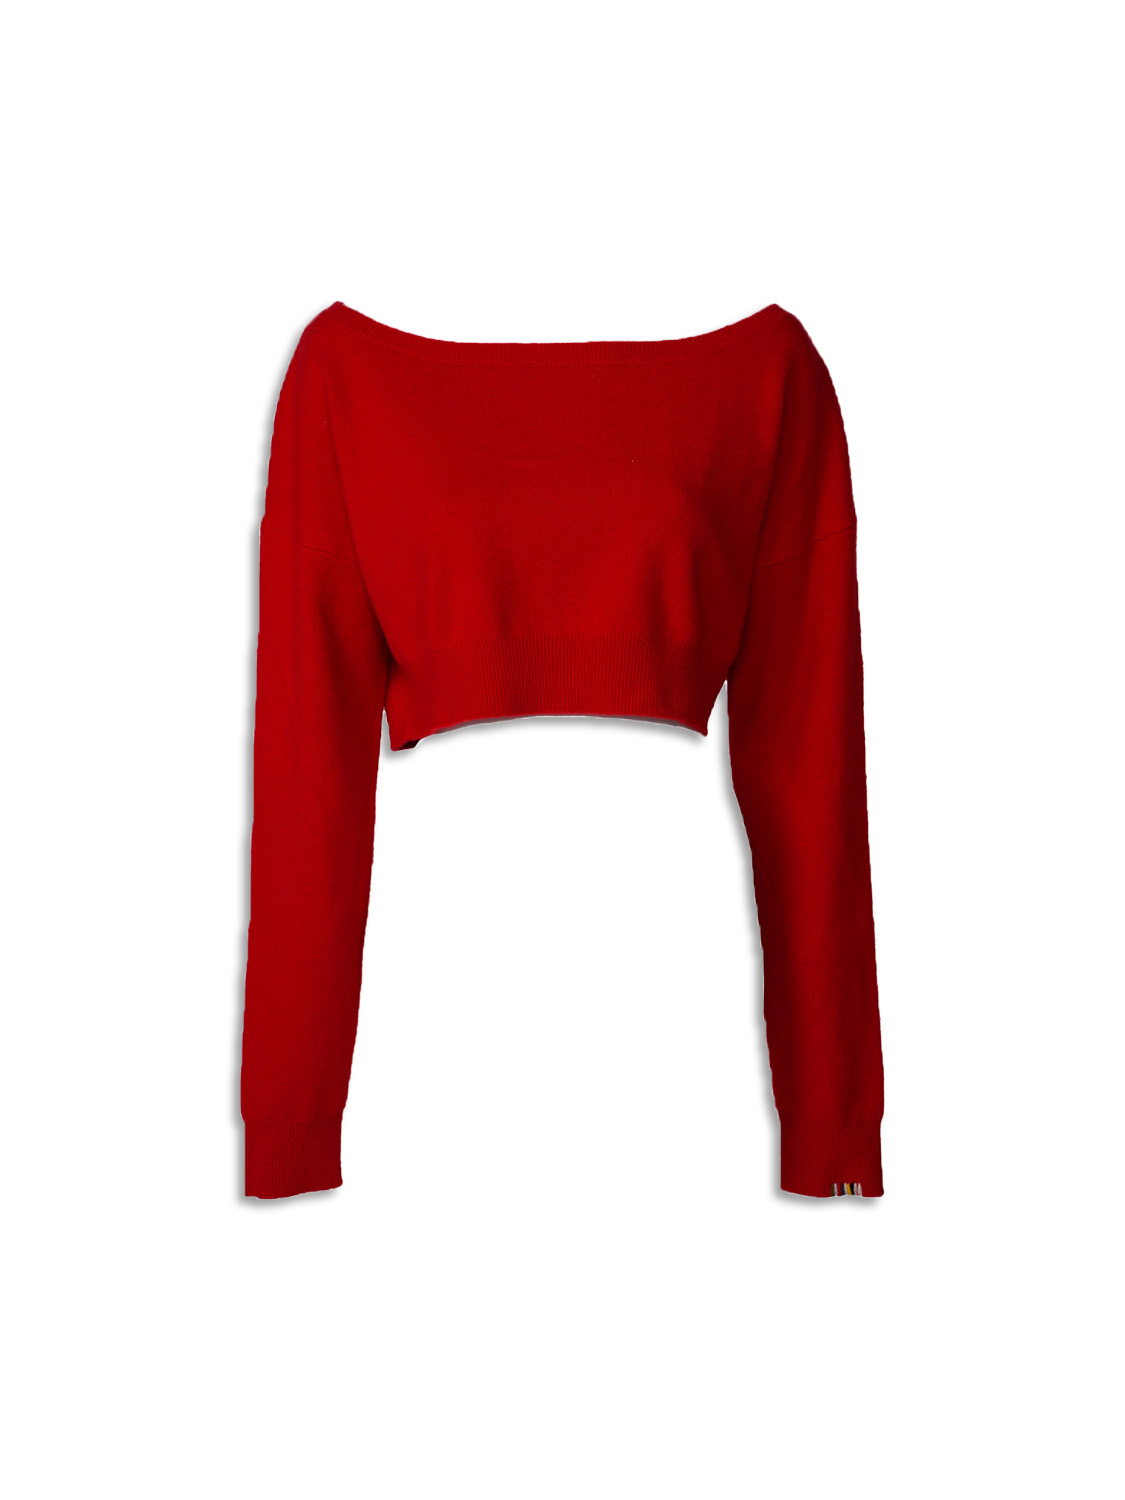 n° 279 Belly - Cropped sweater in cashmere